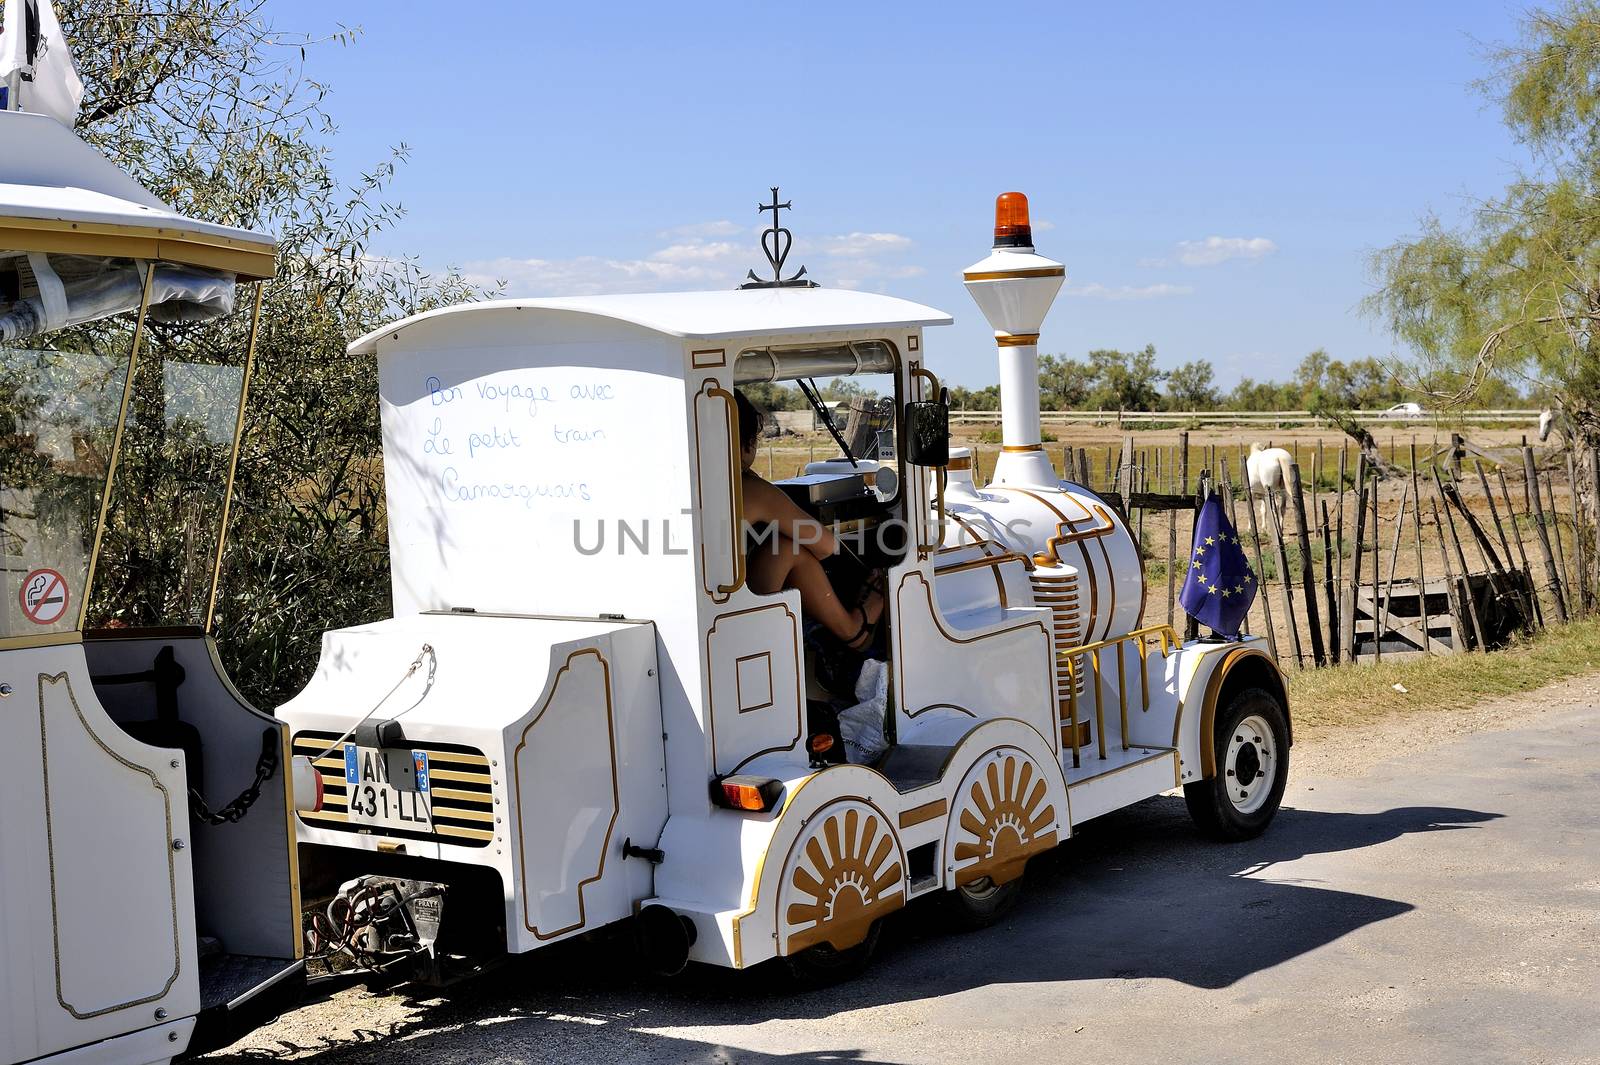 The locomotive of the little train ride Saintes-Maries-de-la-Mer that makes visiting the city and its environs Camargue tourists.